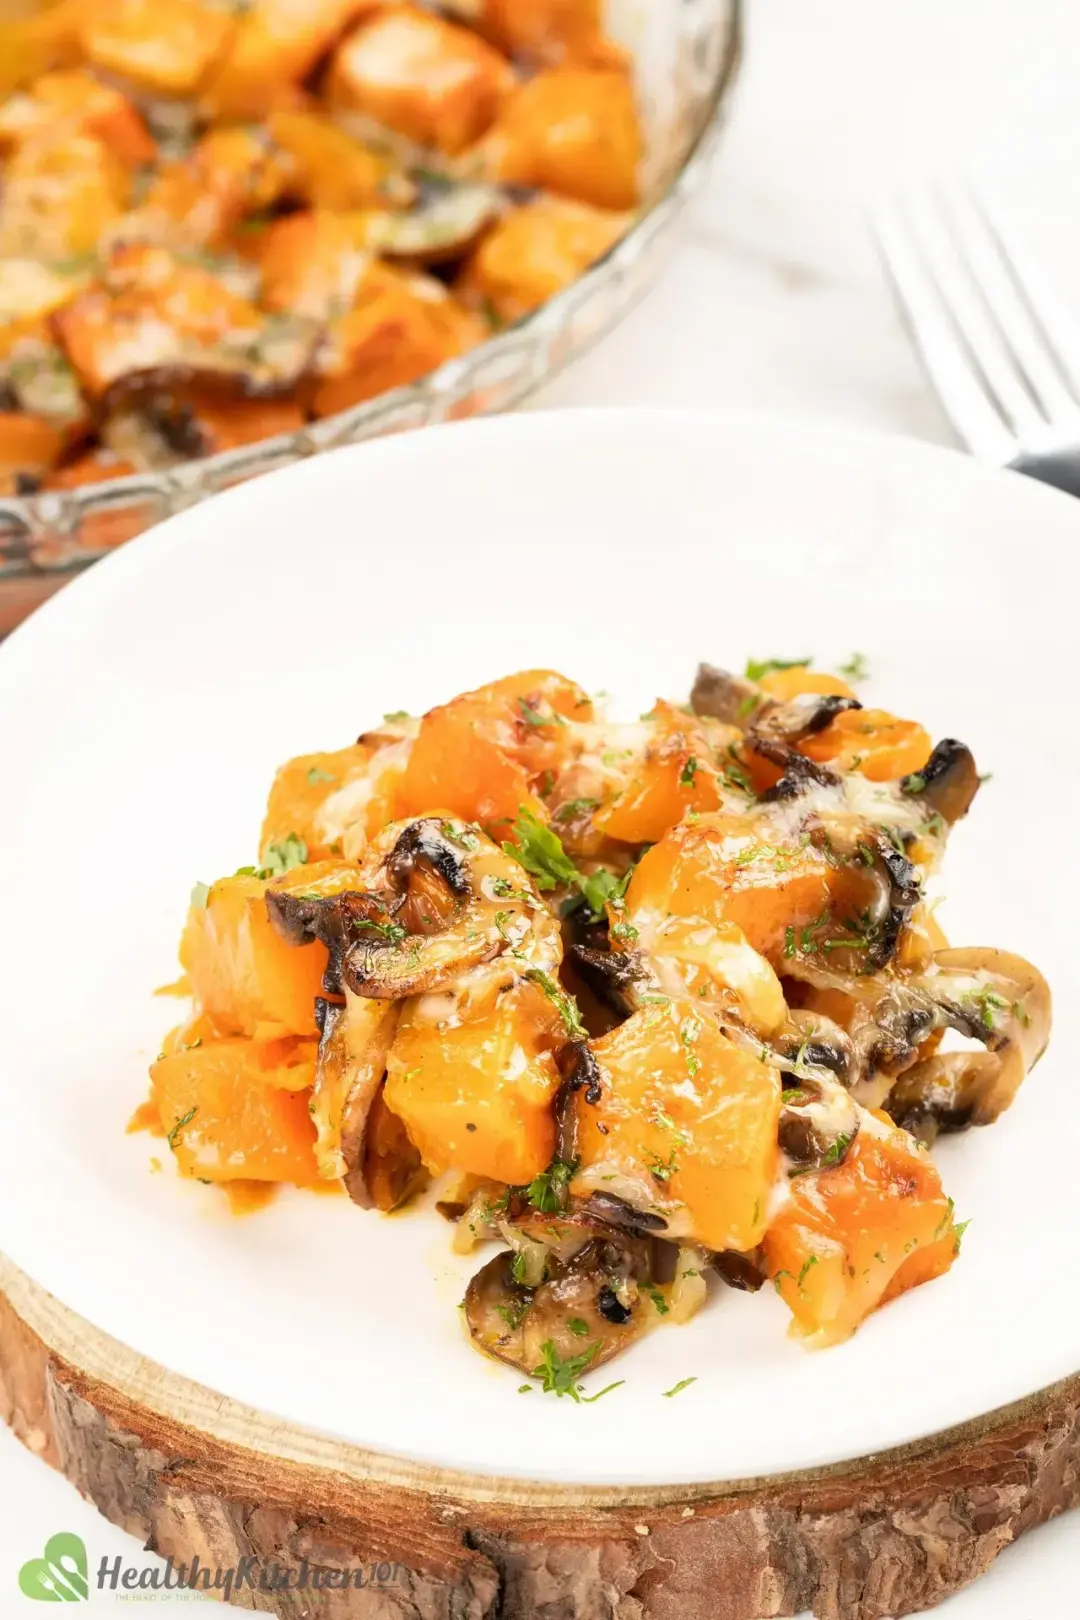 A plate of glossy butternut squash casserole with sliced button mushrooms presented in a white plate